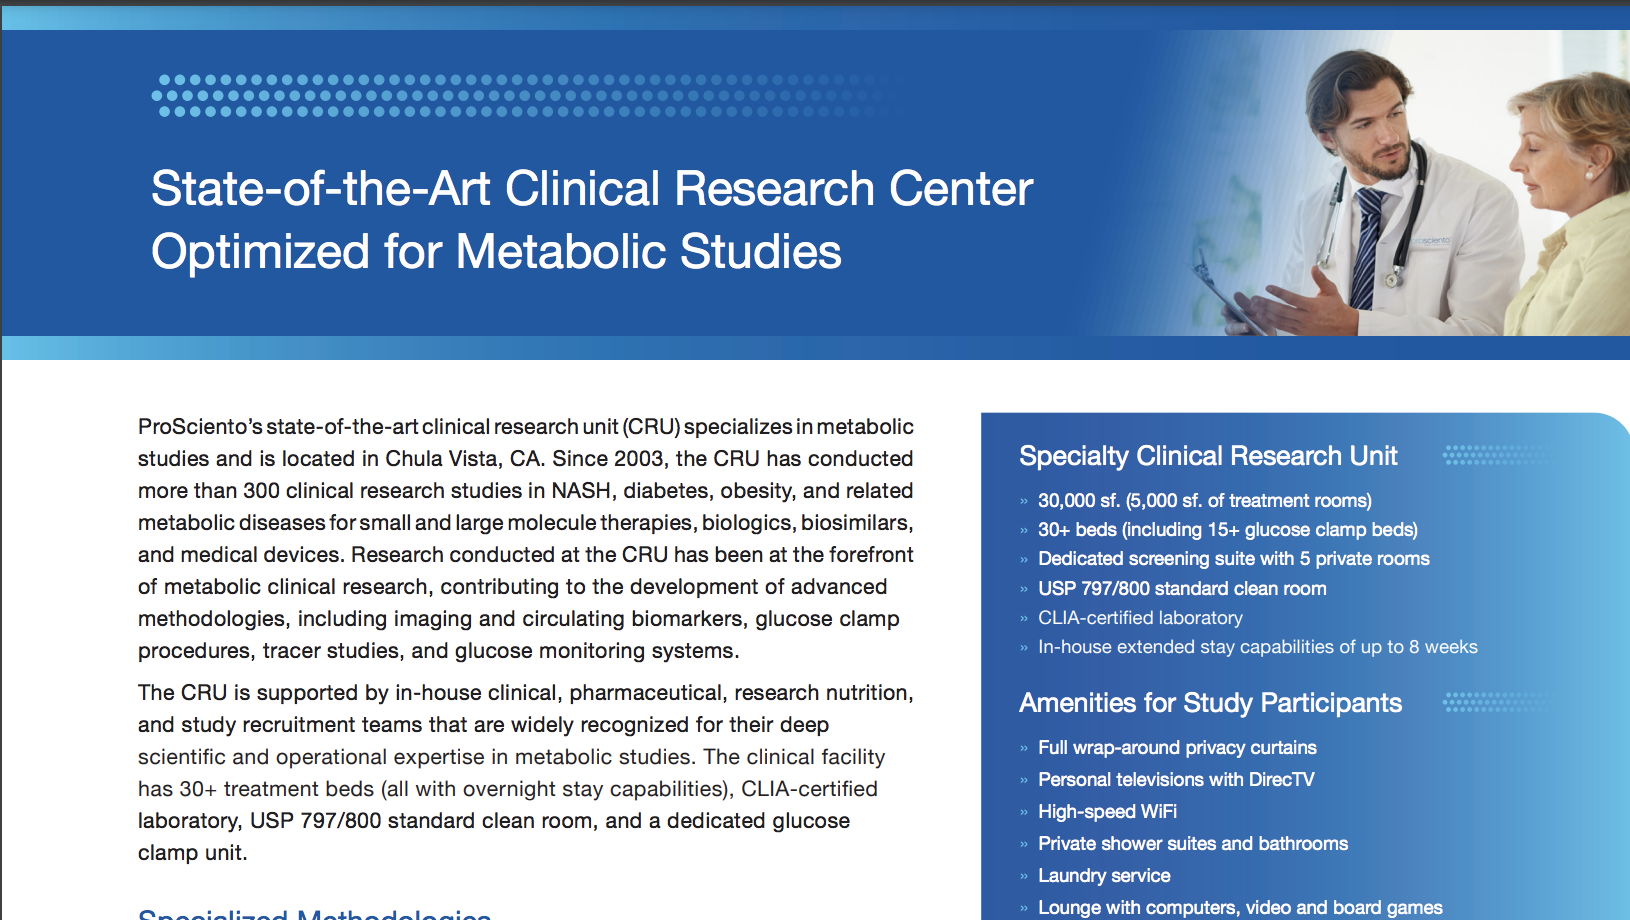 image of ProSciento’s State-of-the-Art Clinical Research Center for Metabolic Studies